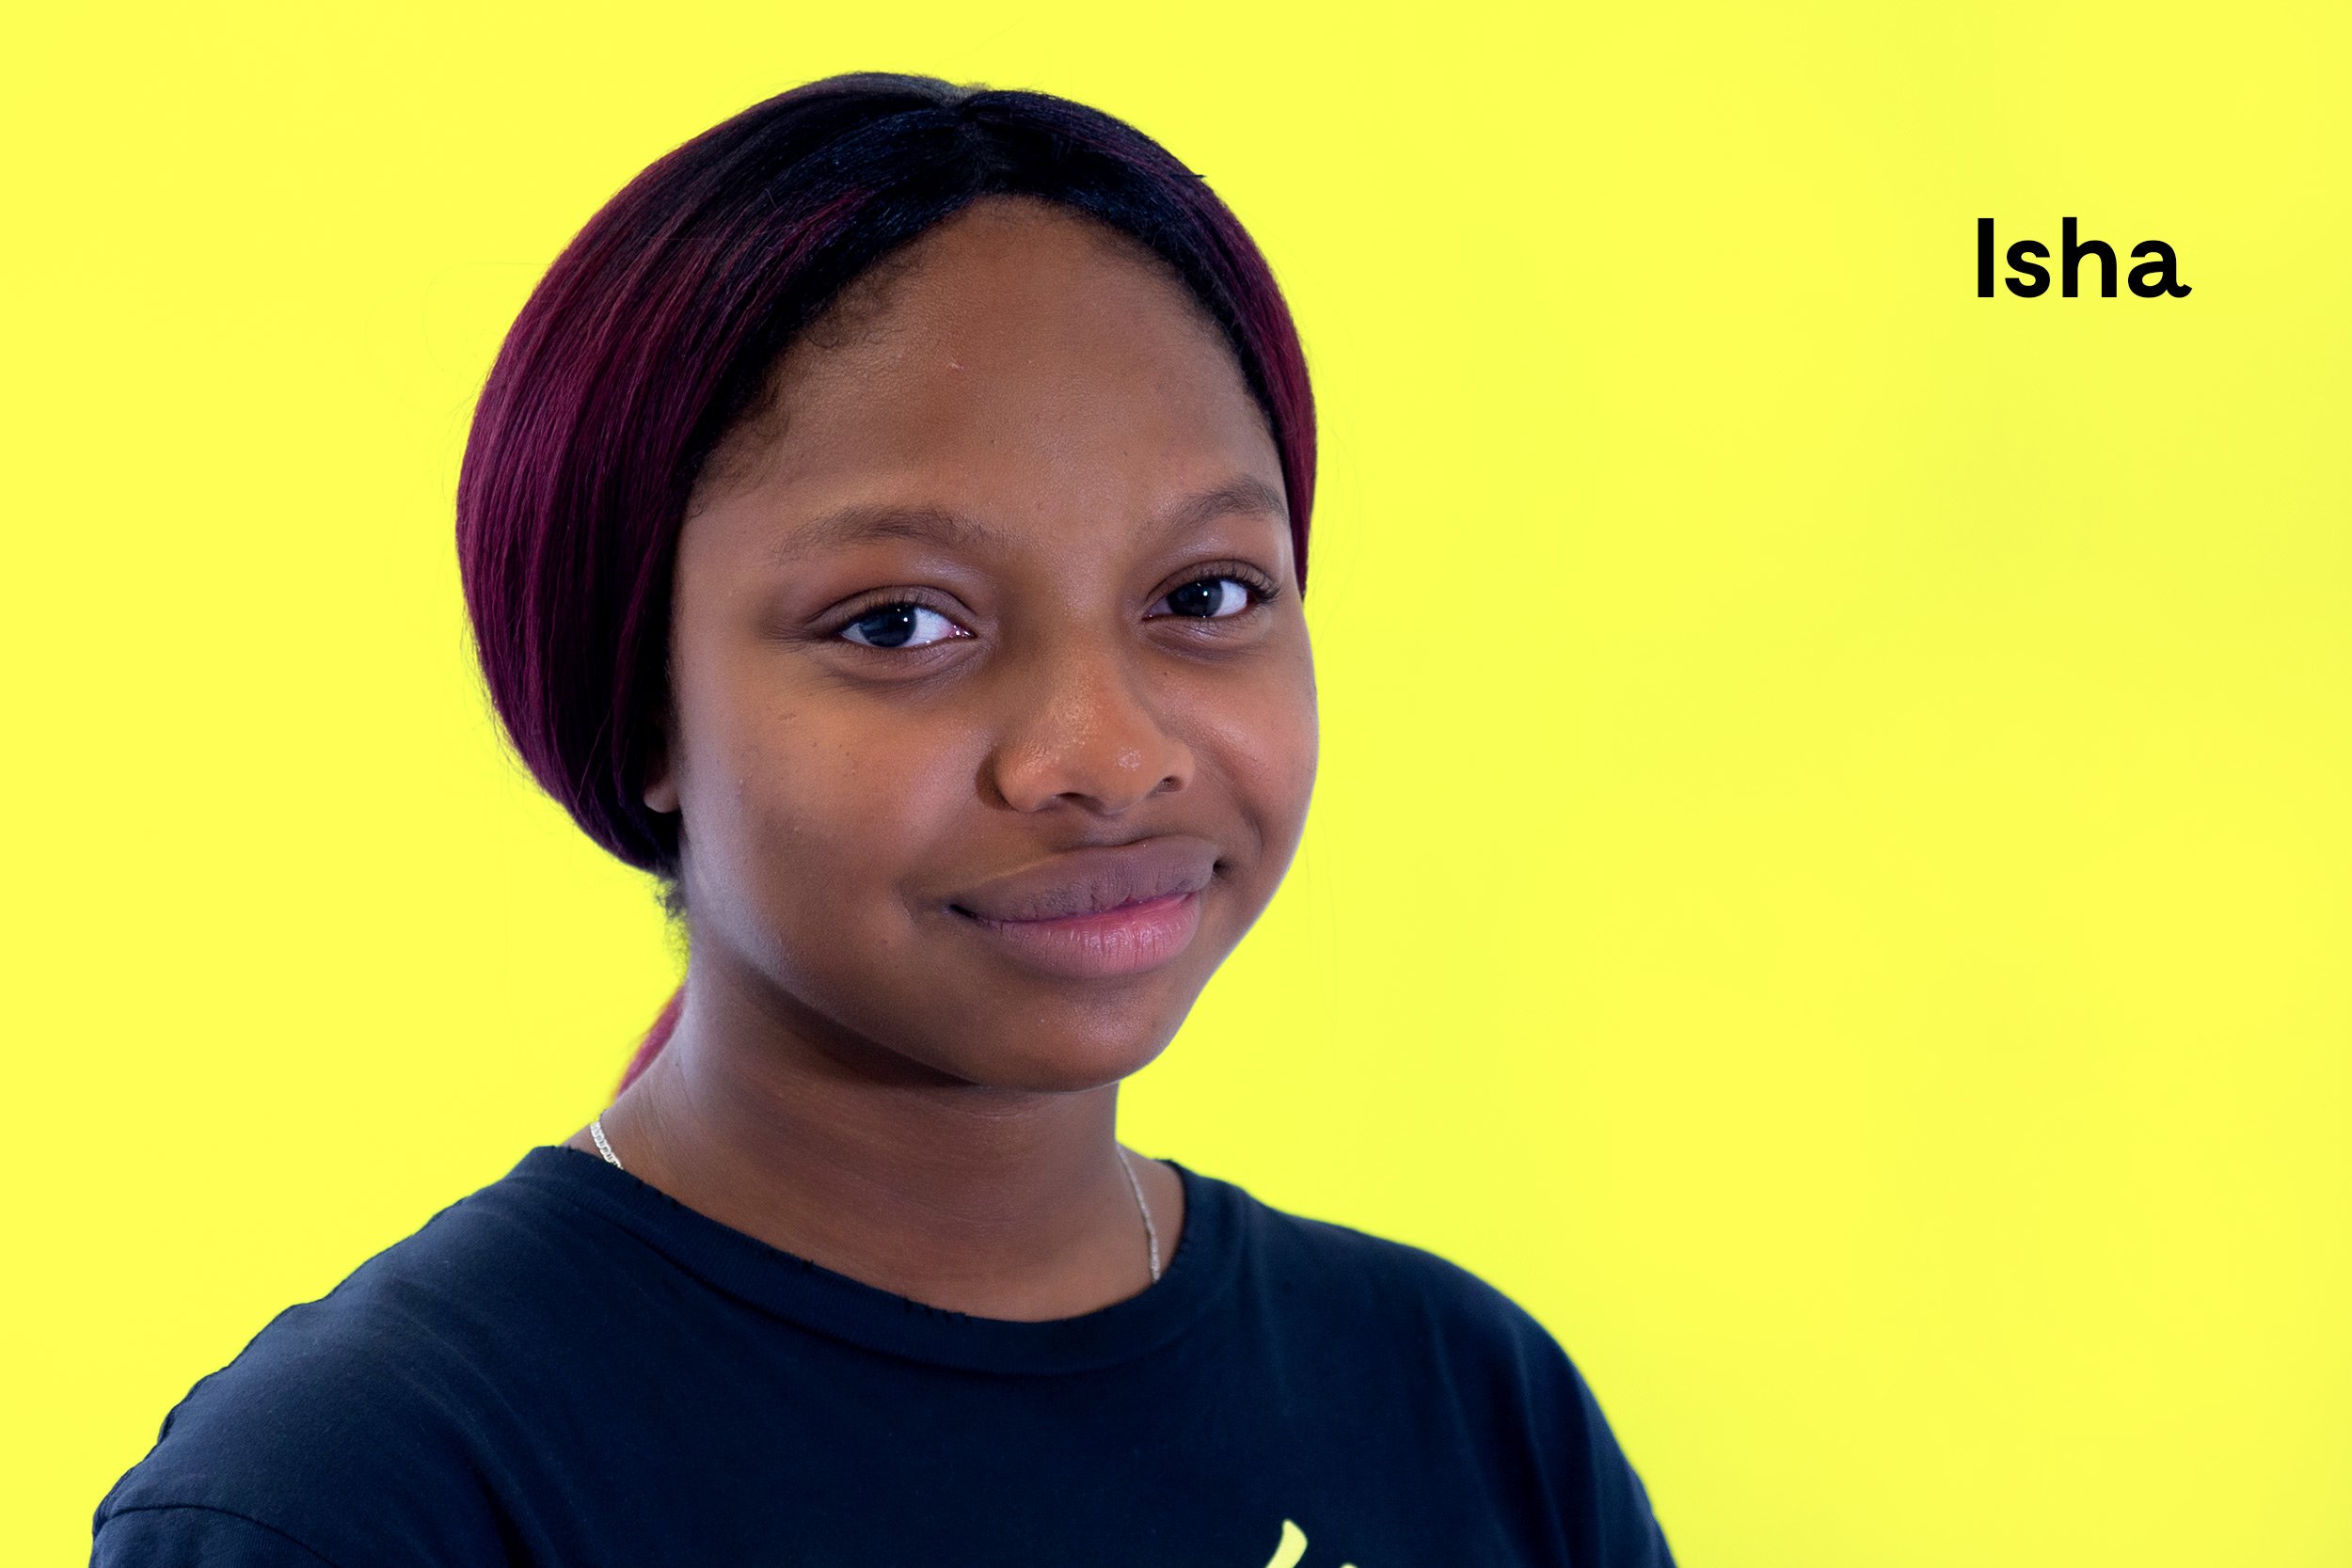  Isha Sheriff (b. 2006) is a 10th grader with a passion for art, baking and basketball. She loves and is proud of her Sierra Leonean heritage because it is a little-known culture in Québec.&nbsp; 